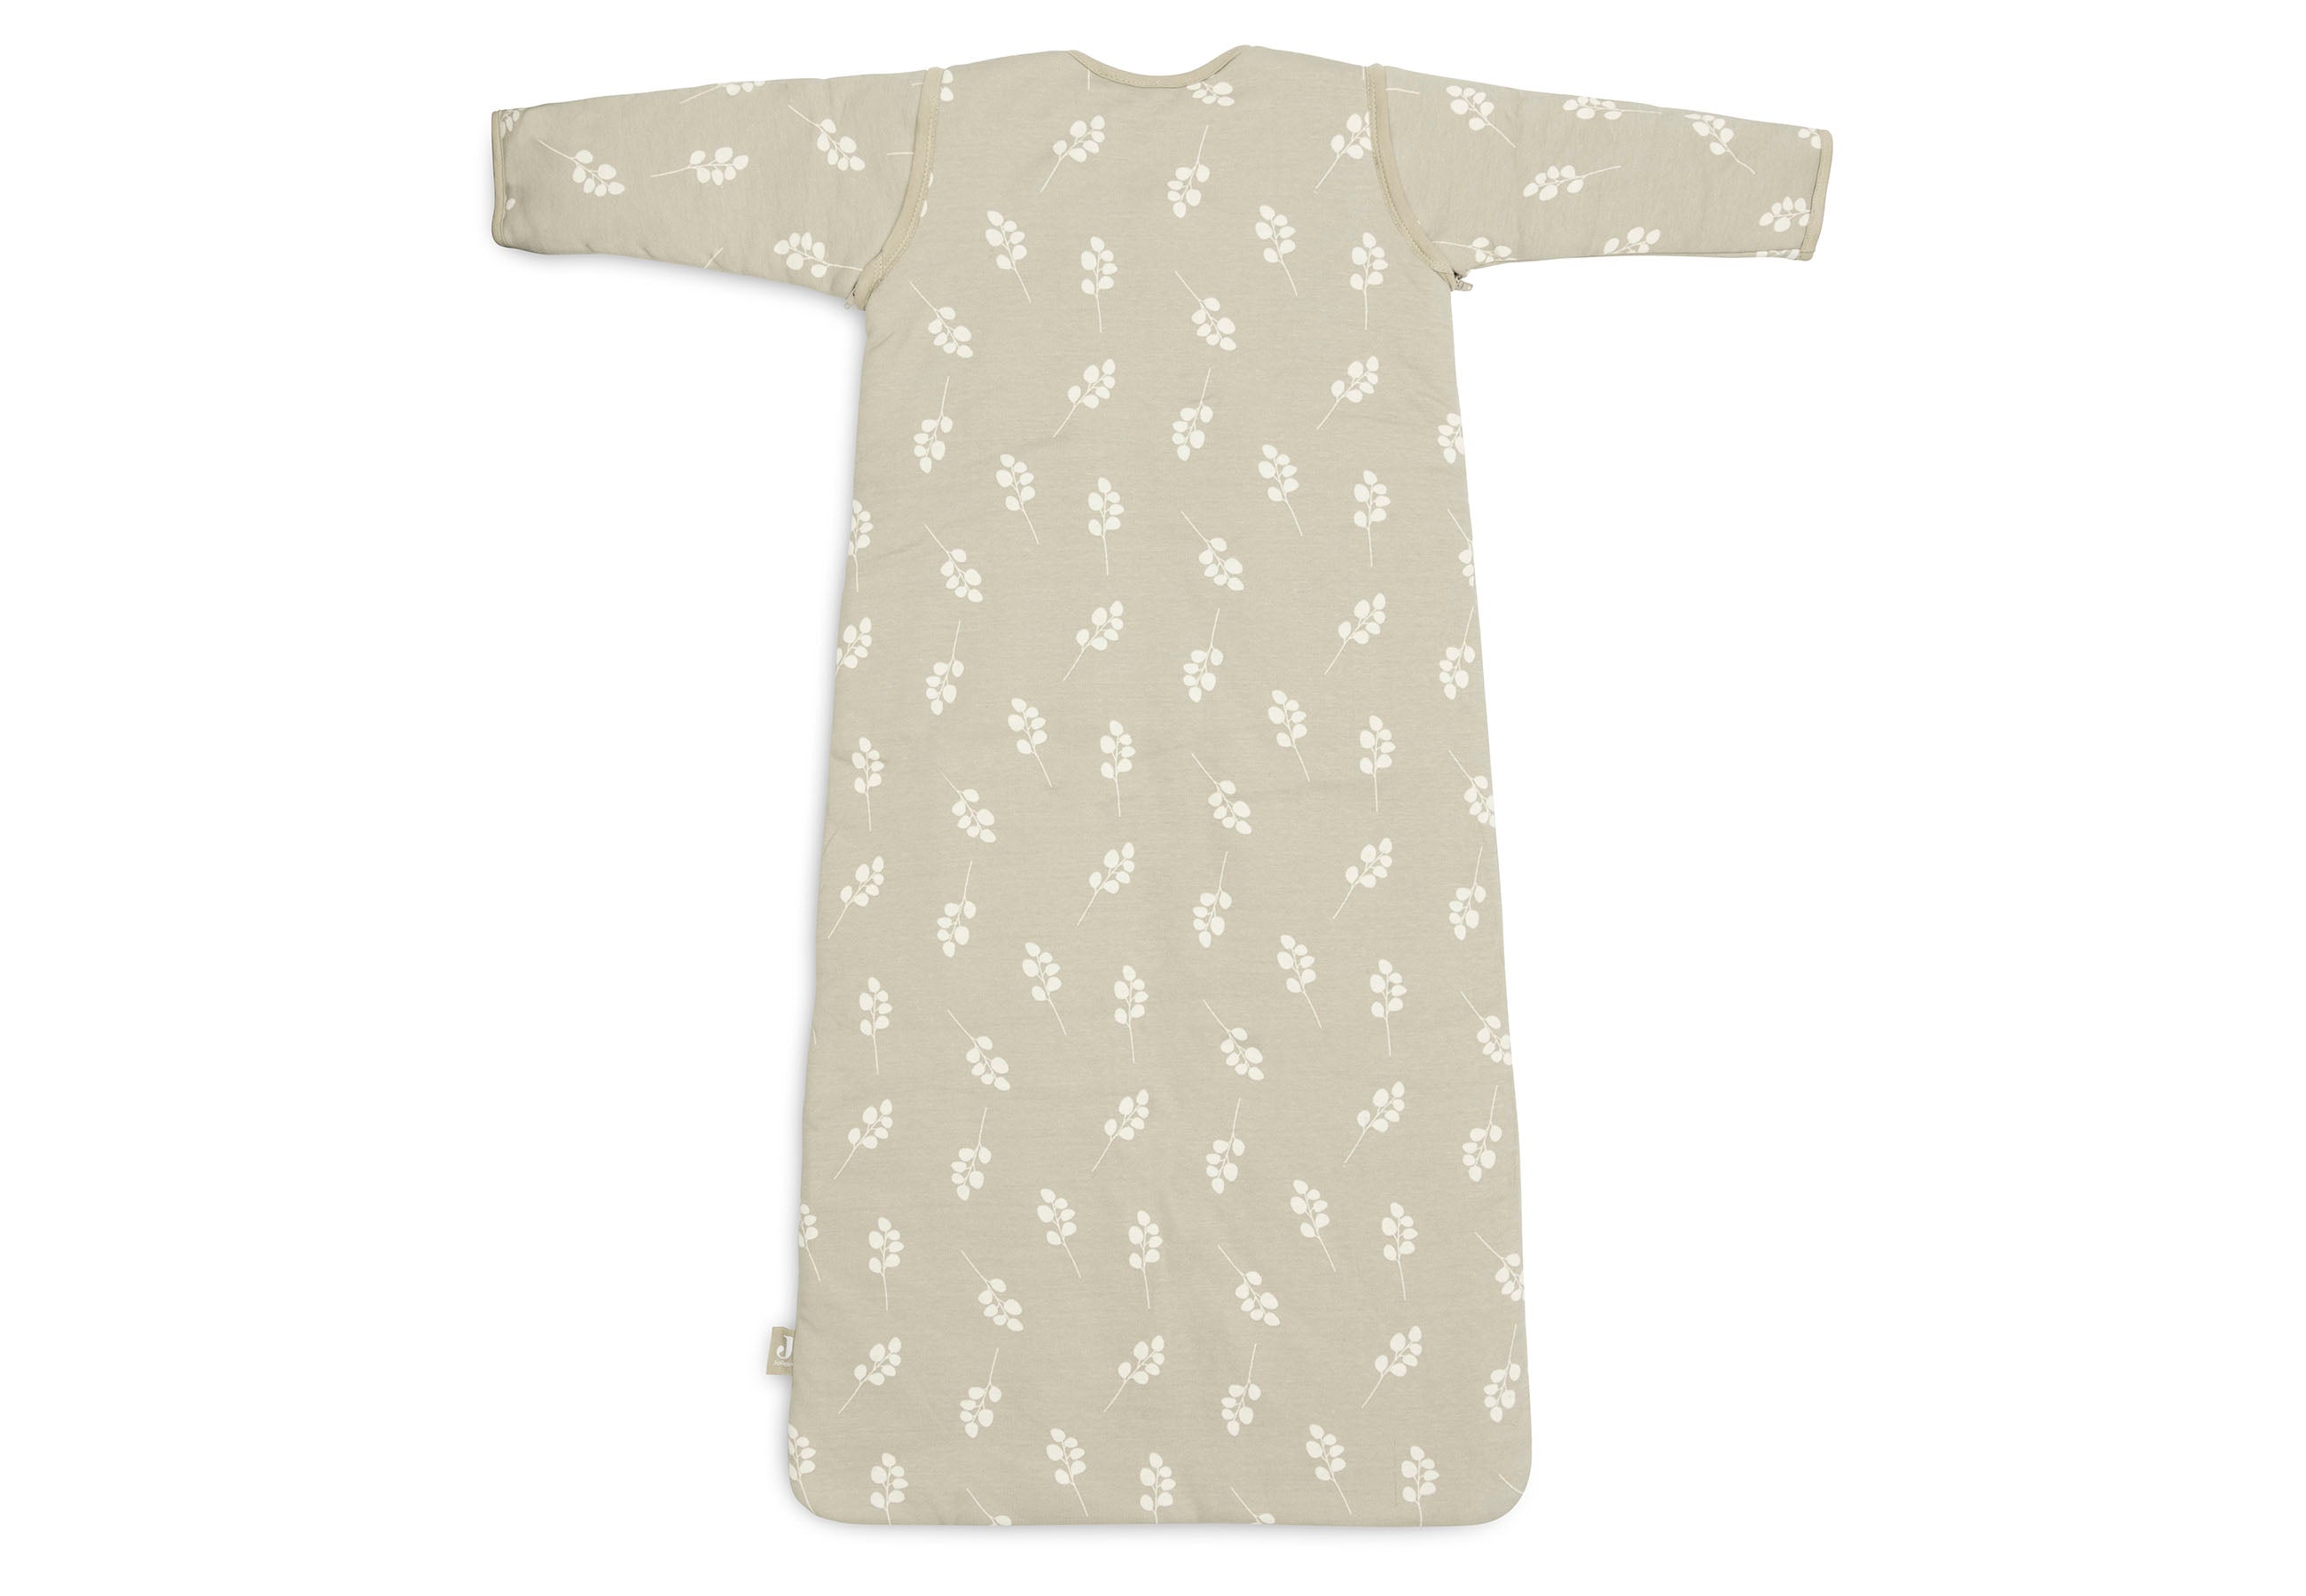 Jollein Jollein Baby Sleeping Bag with Removable Sleeves - Twig Olive Green - Pearls & Swines